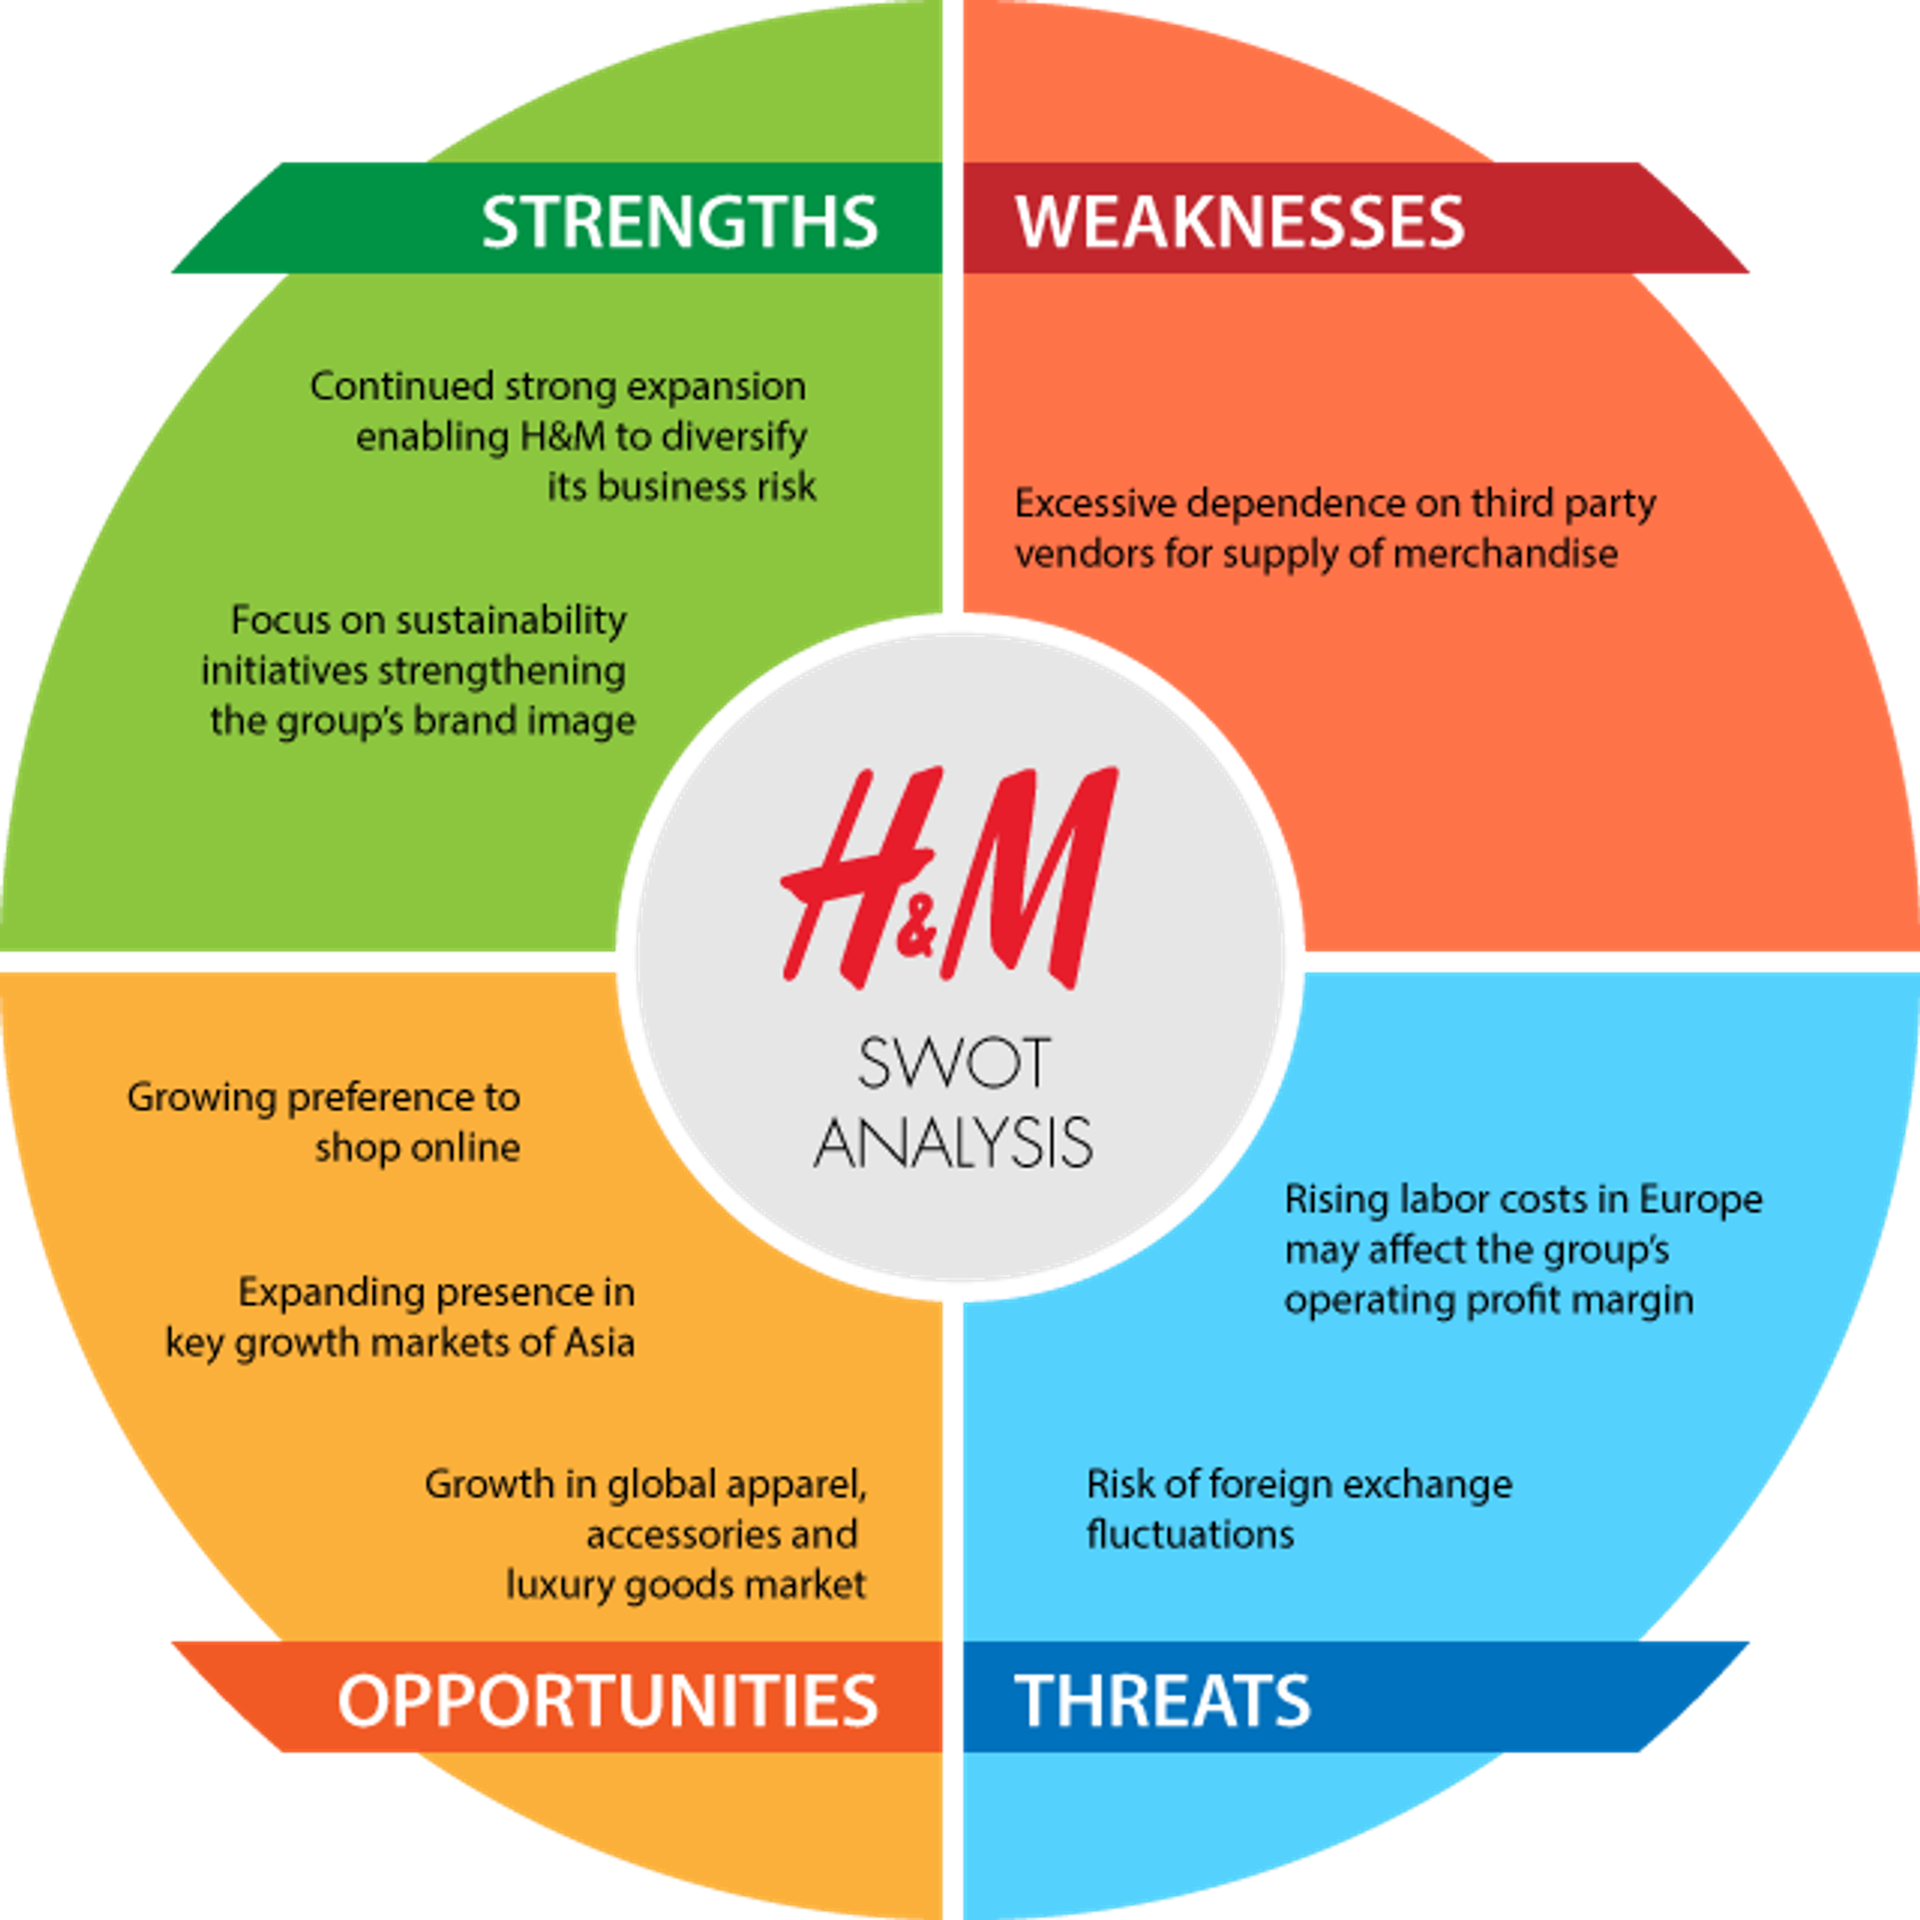 H&M’s SWOT analysis for reference | Source